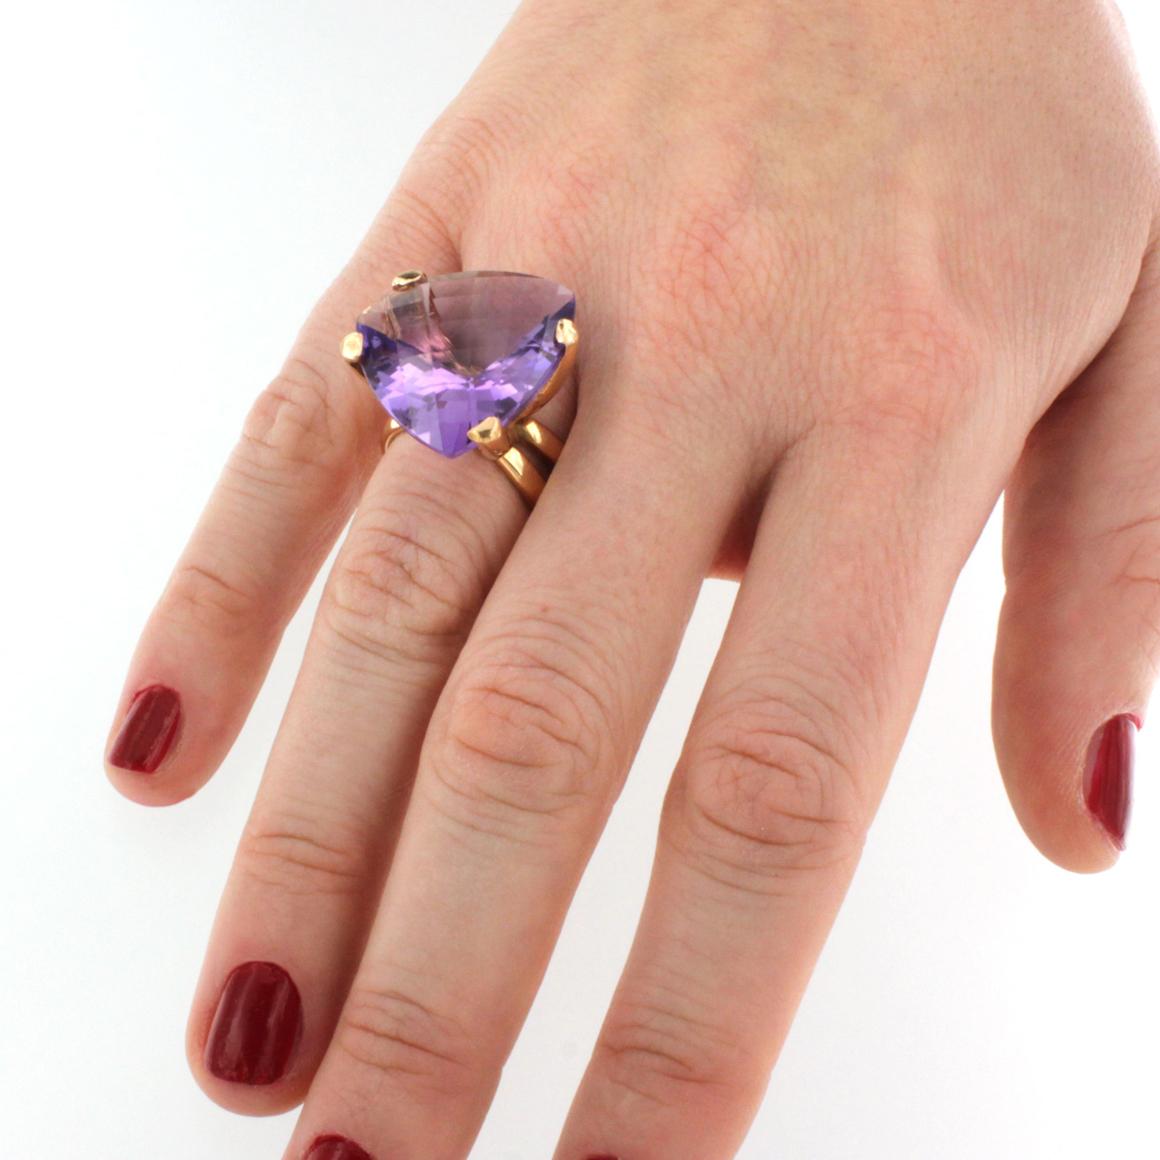 Special Ring in 18k rose gold with big Amethyst (triangular cut, size: 20x22mm)

Size of ring: 14 EU - 7 USA   g.14,80

All Stanoppi Jewelry is new and has never been previously owned or worn. Each item will arrive at your door beautifully gift